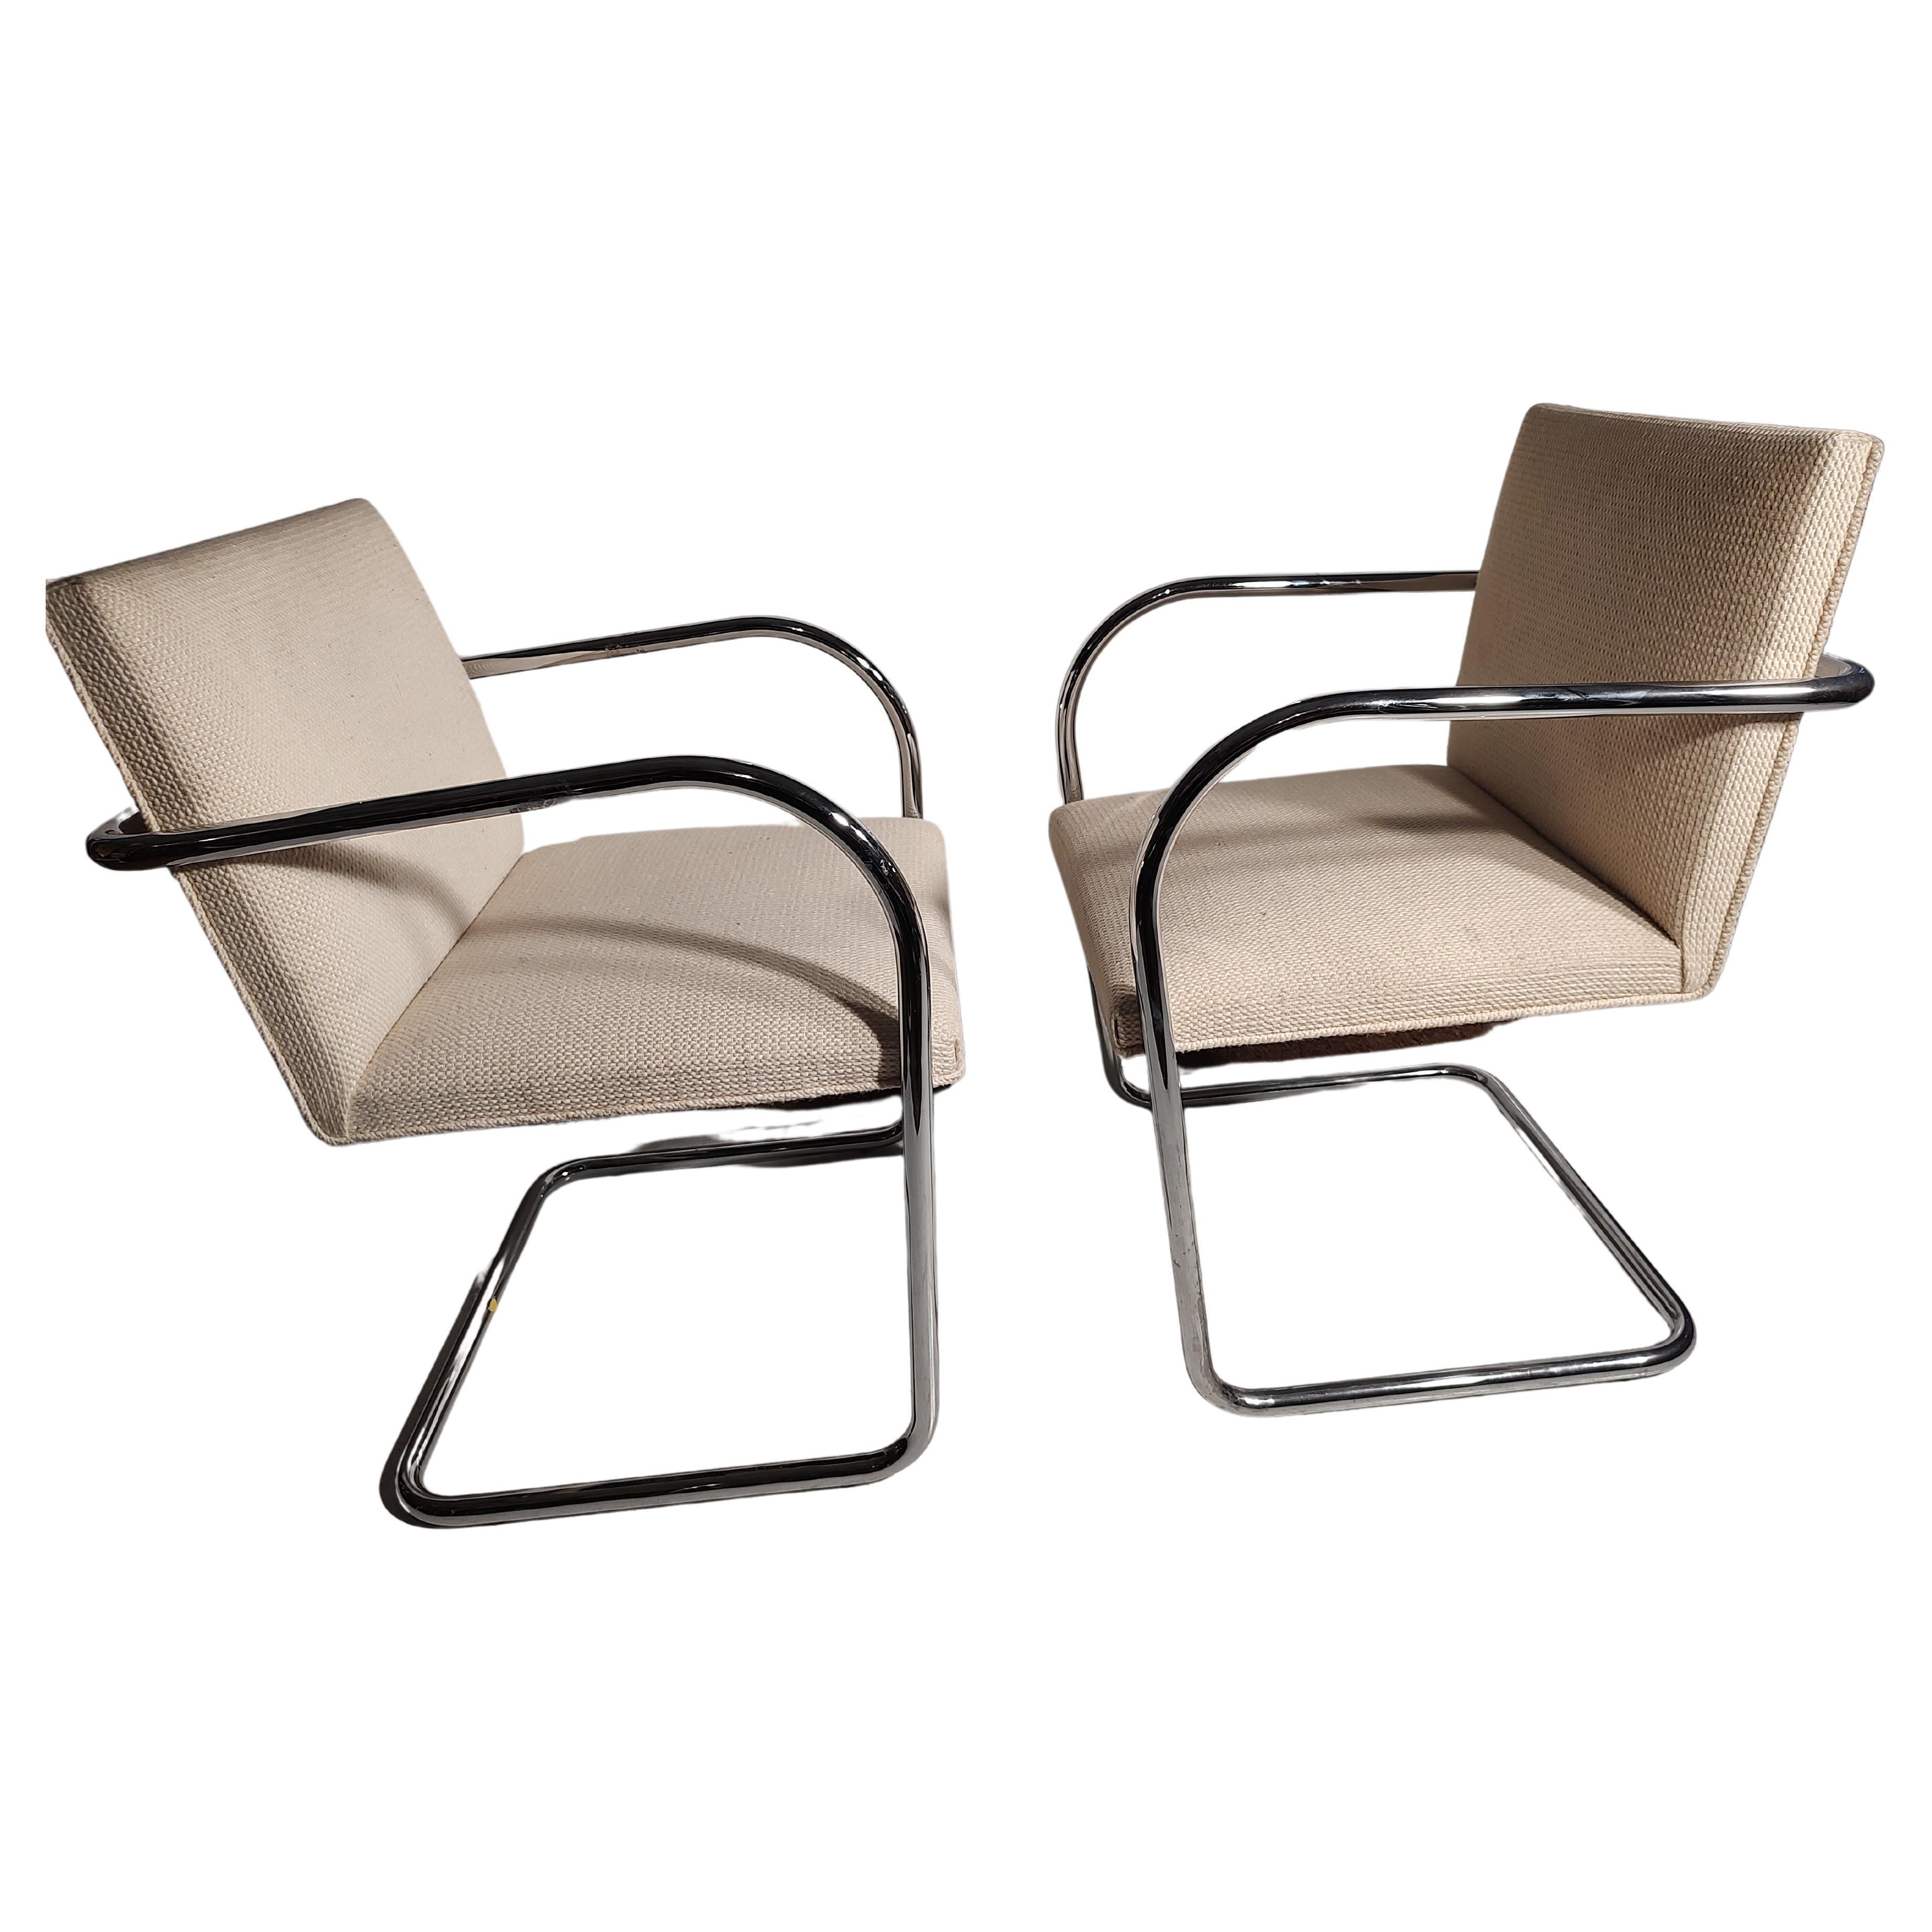 Hand-Crafted Set of 10 Mid-Century Modern Knoll Brno Tubular Chairs Ludwig Mies Van Der Rohe For Sale